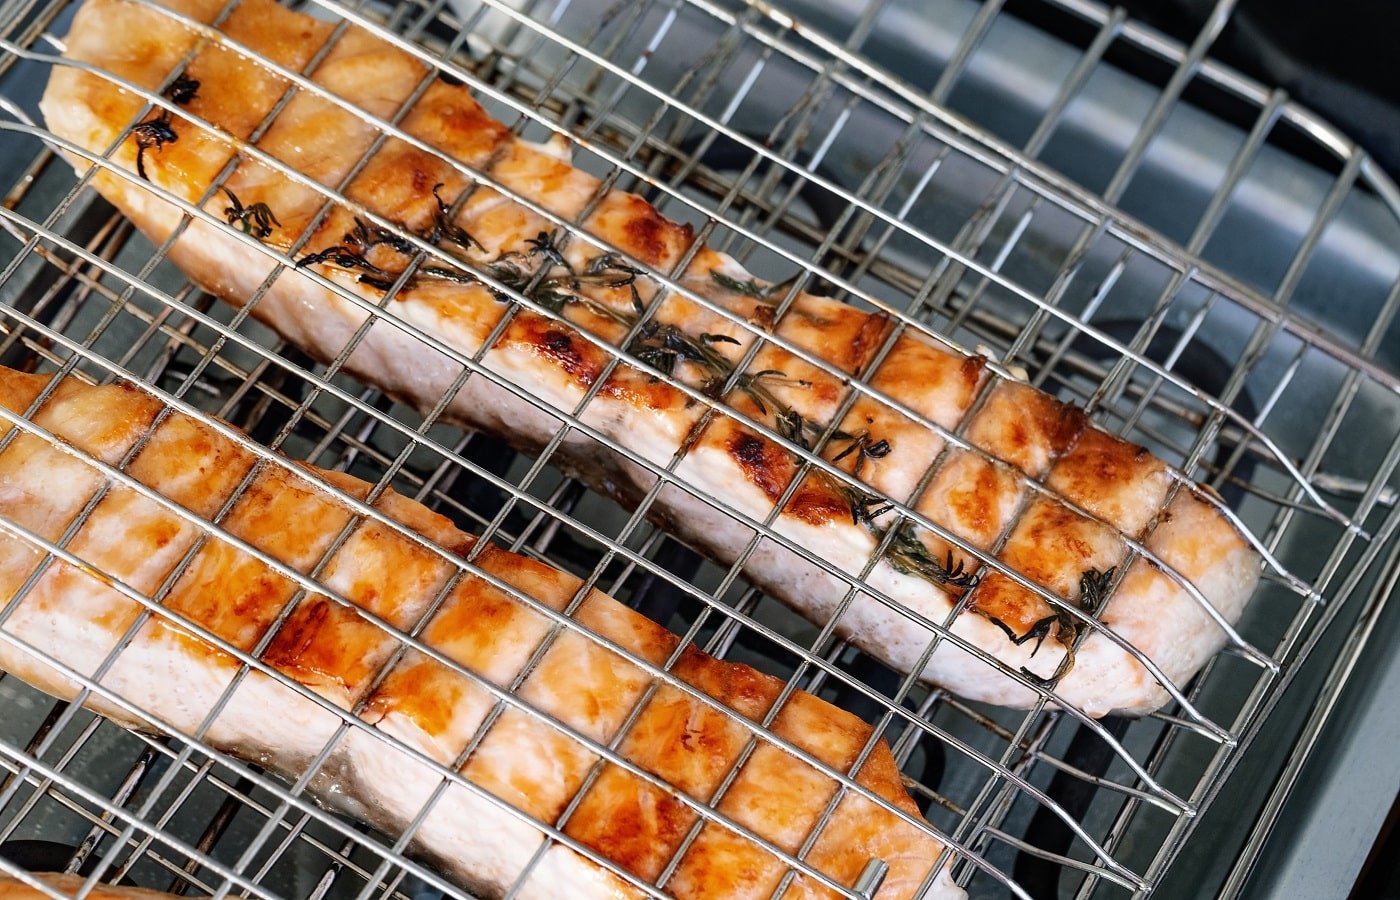 Salmon fillet cooking on grid. Red Fish roasting on electric grill. Food background.